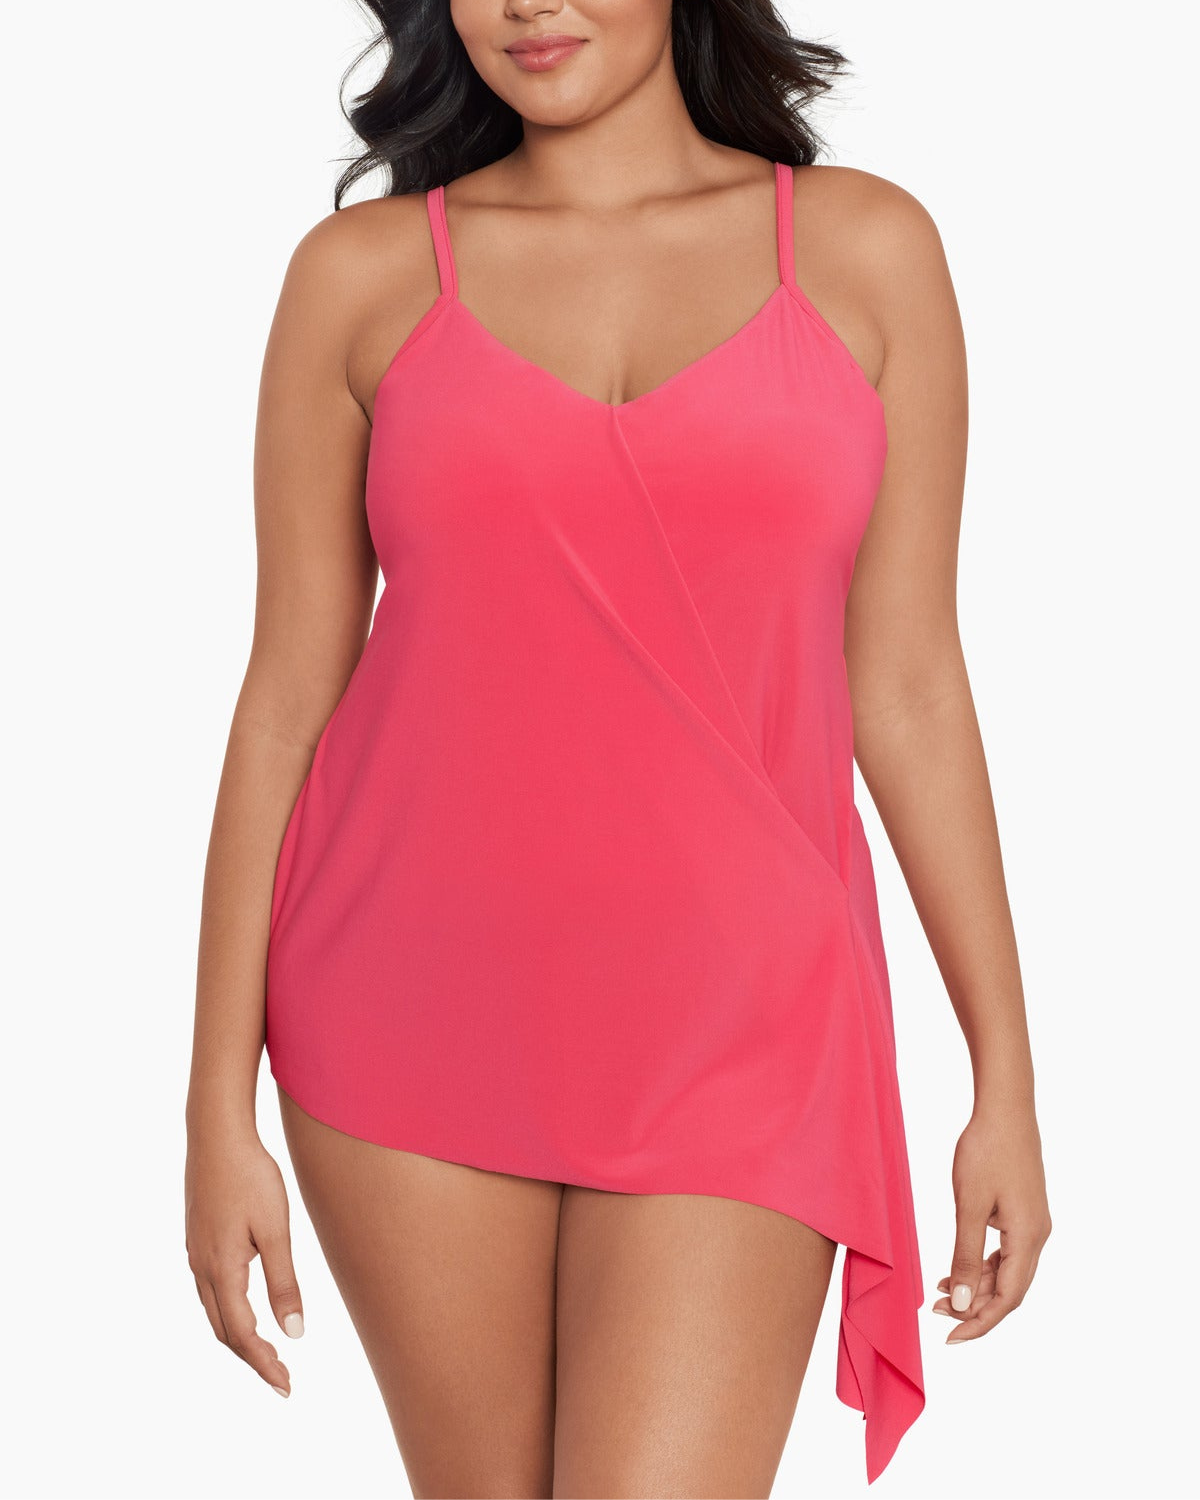 Model wearing a tankini top in black with hidden underwire, tie side and adjustable straps in coral pink